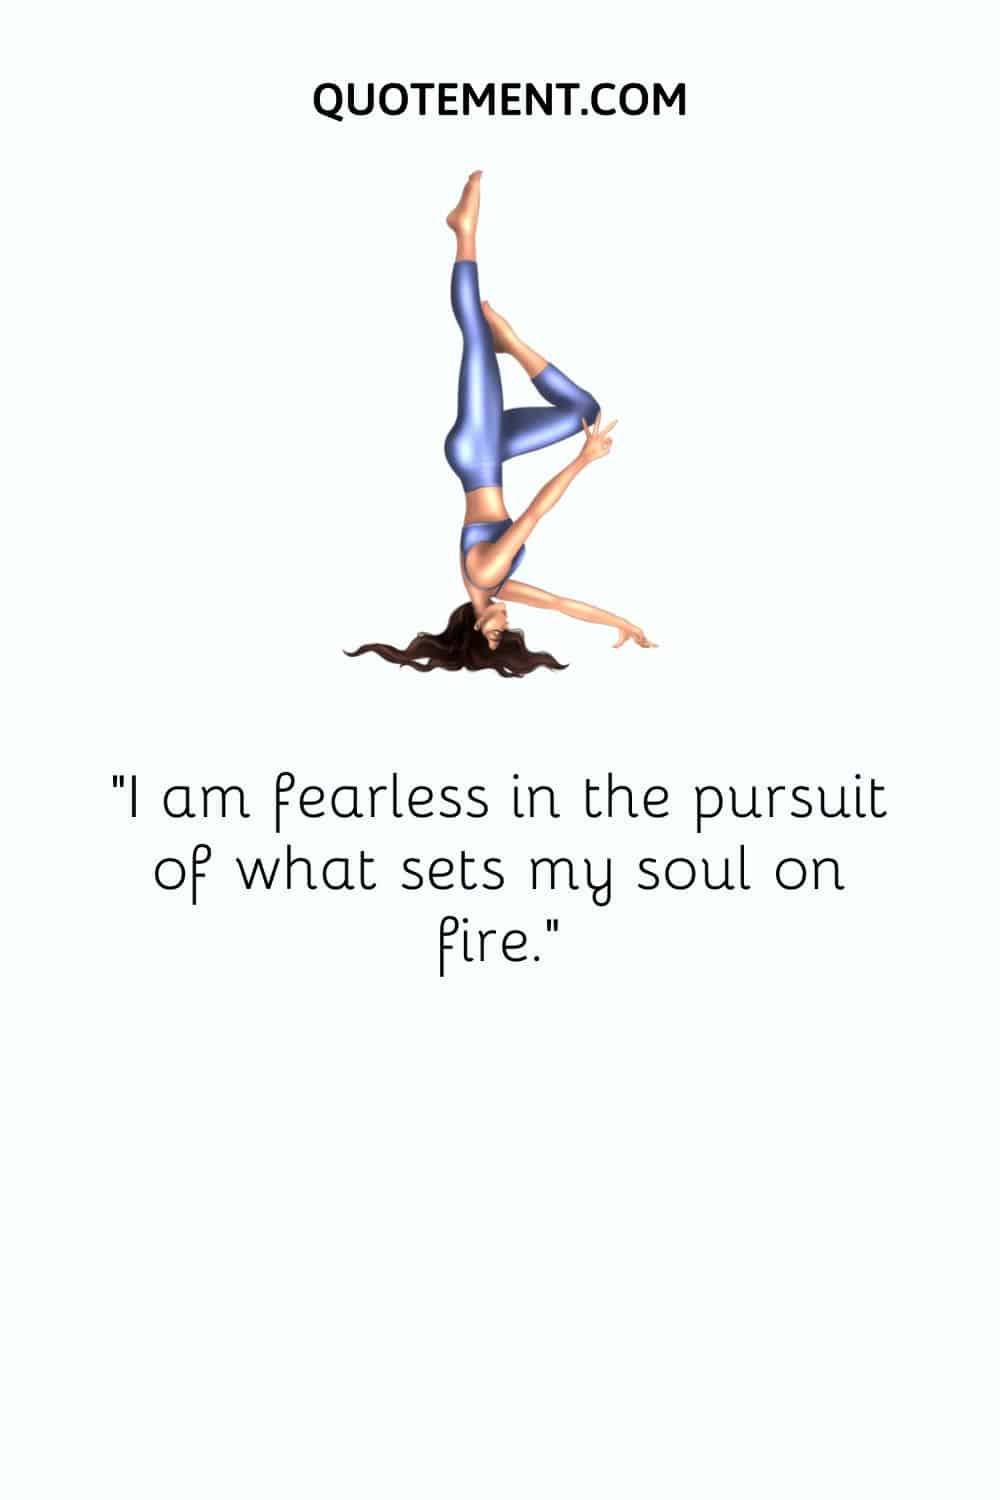 I am fearless in the pursuit of what sets my soul on fire